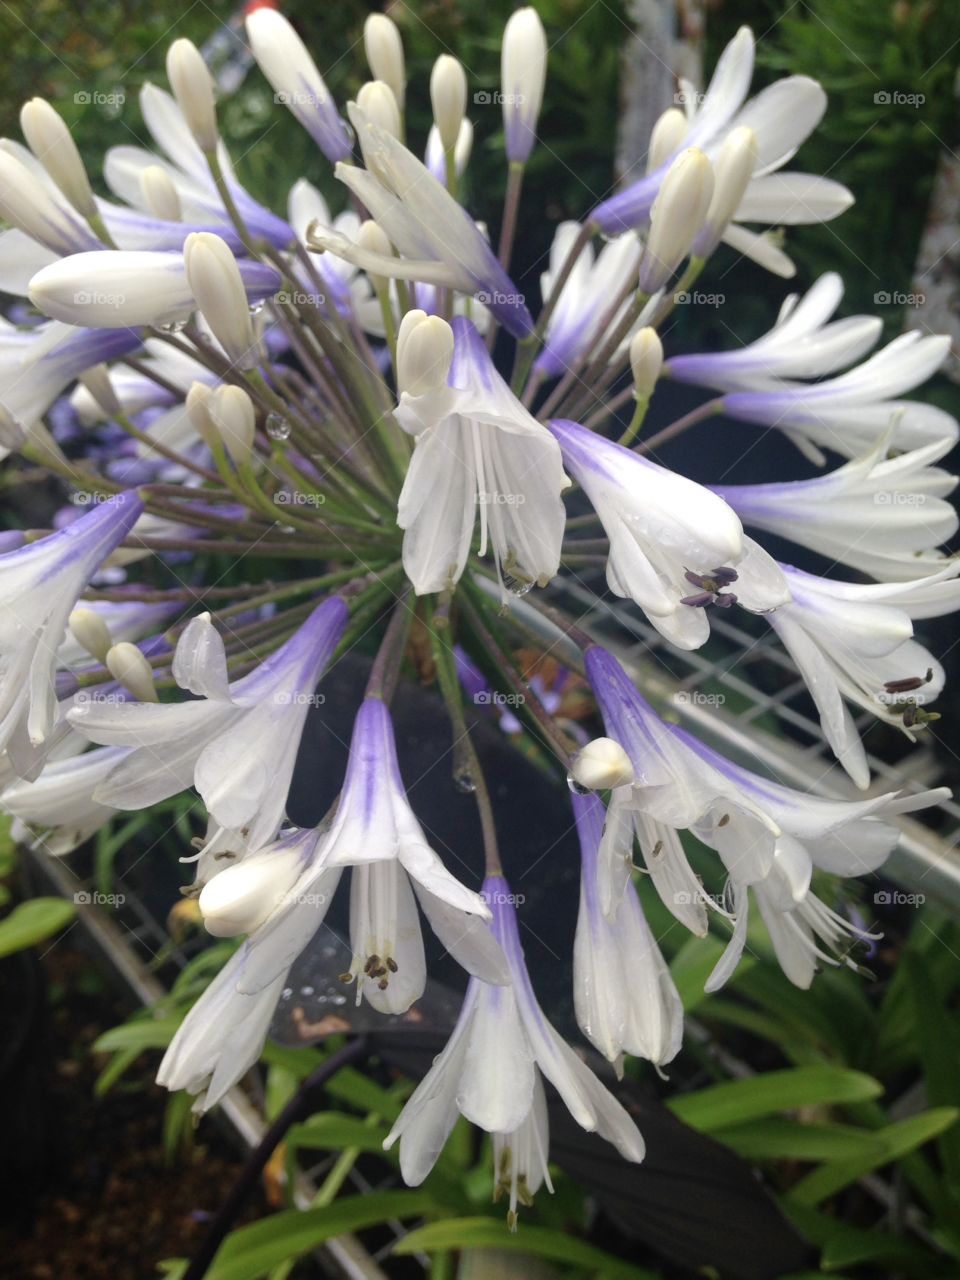 Agapanthus Queens mother 